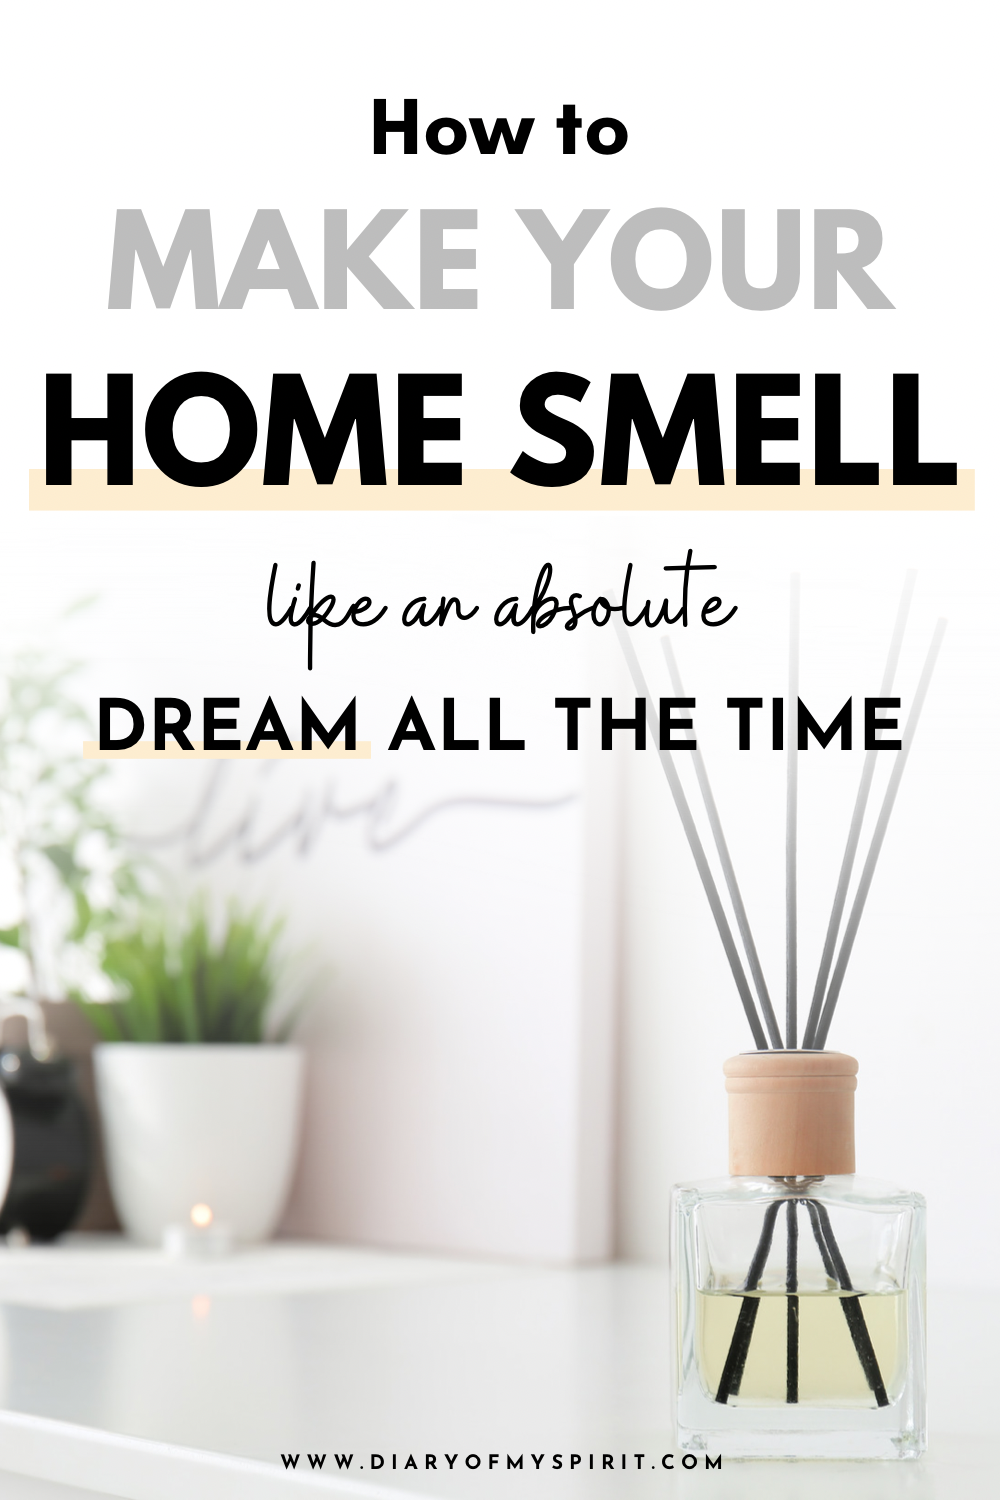 how to make your house smell good all the time. how to make your home smell amazing 24/7. good smelling house. make home smell better. best ways to make house smell nice. how to keep the house smelling fresh. smell fresh. home smell. make your room smell good. fresh smell. natural ways to scent house